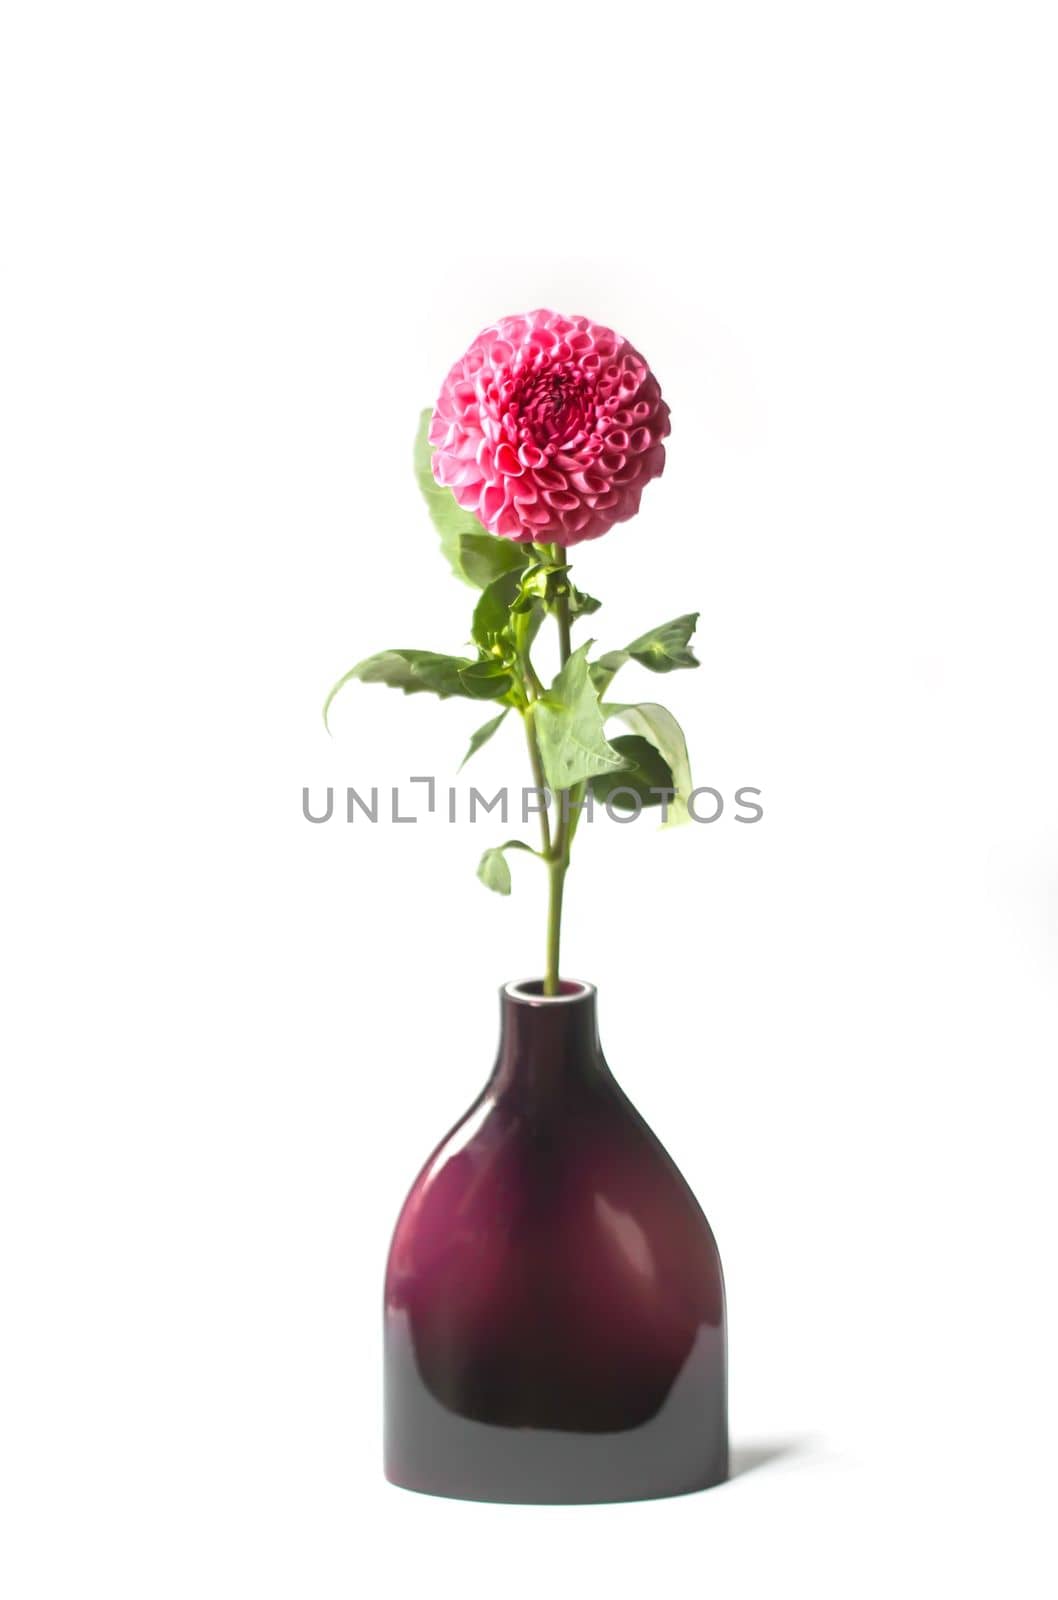 Beautiful pink dahlia flower in a vase. Beautiful plant flowering at summer.